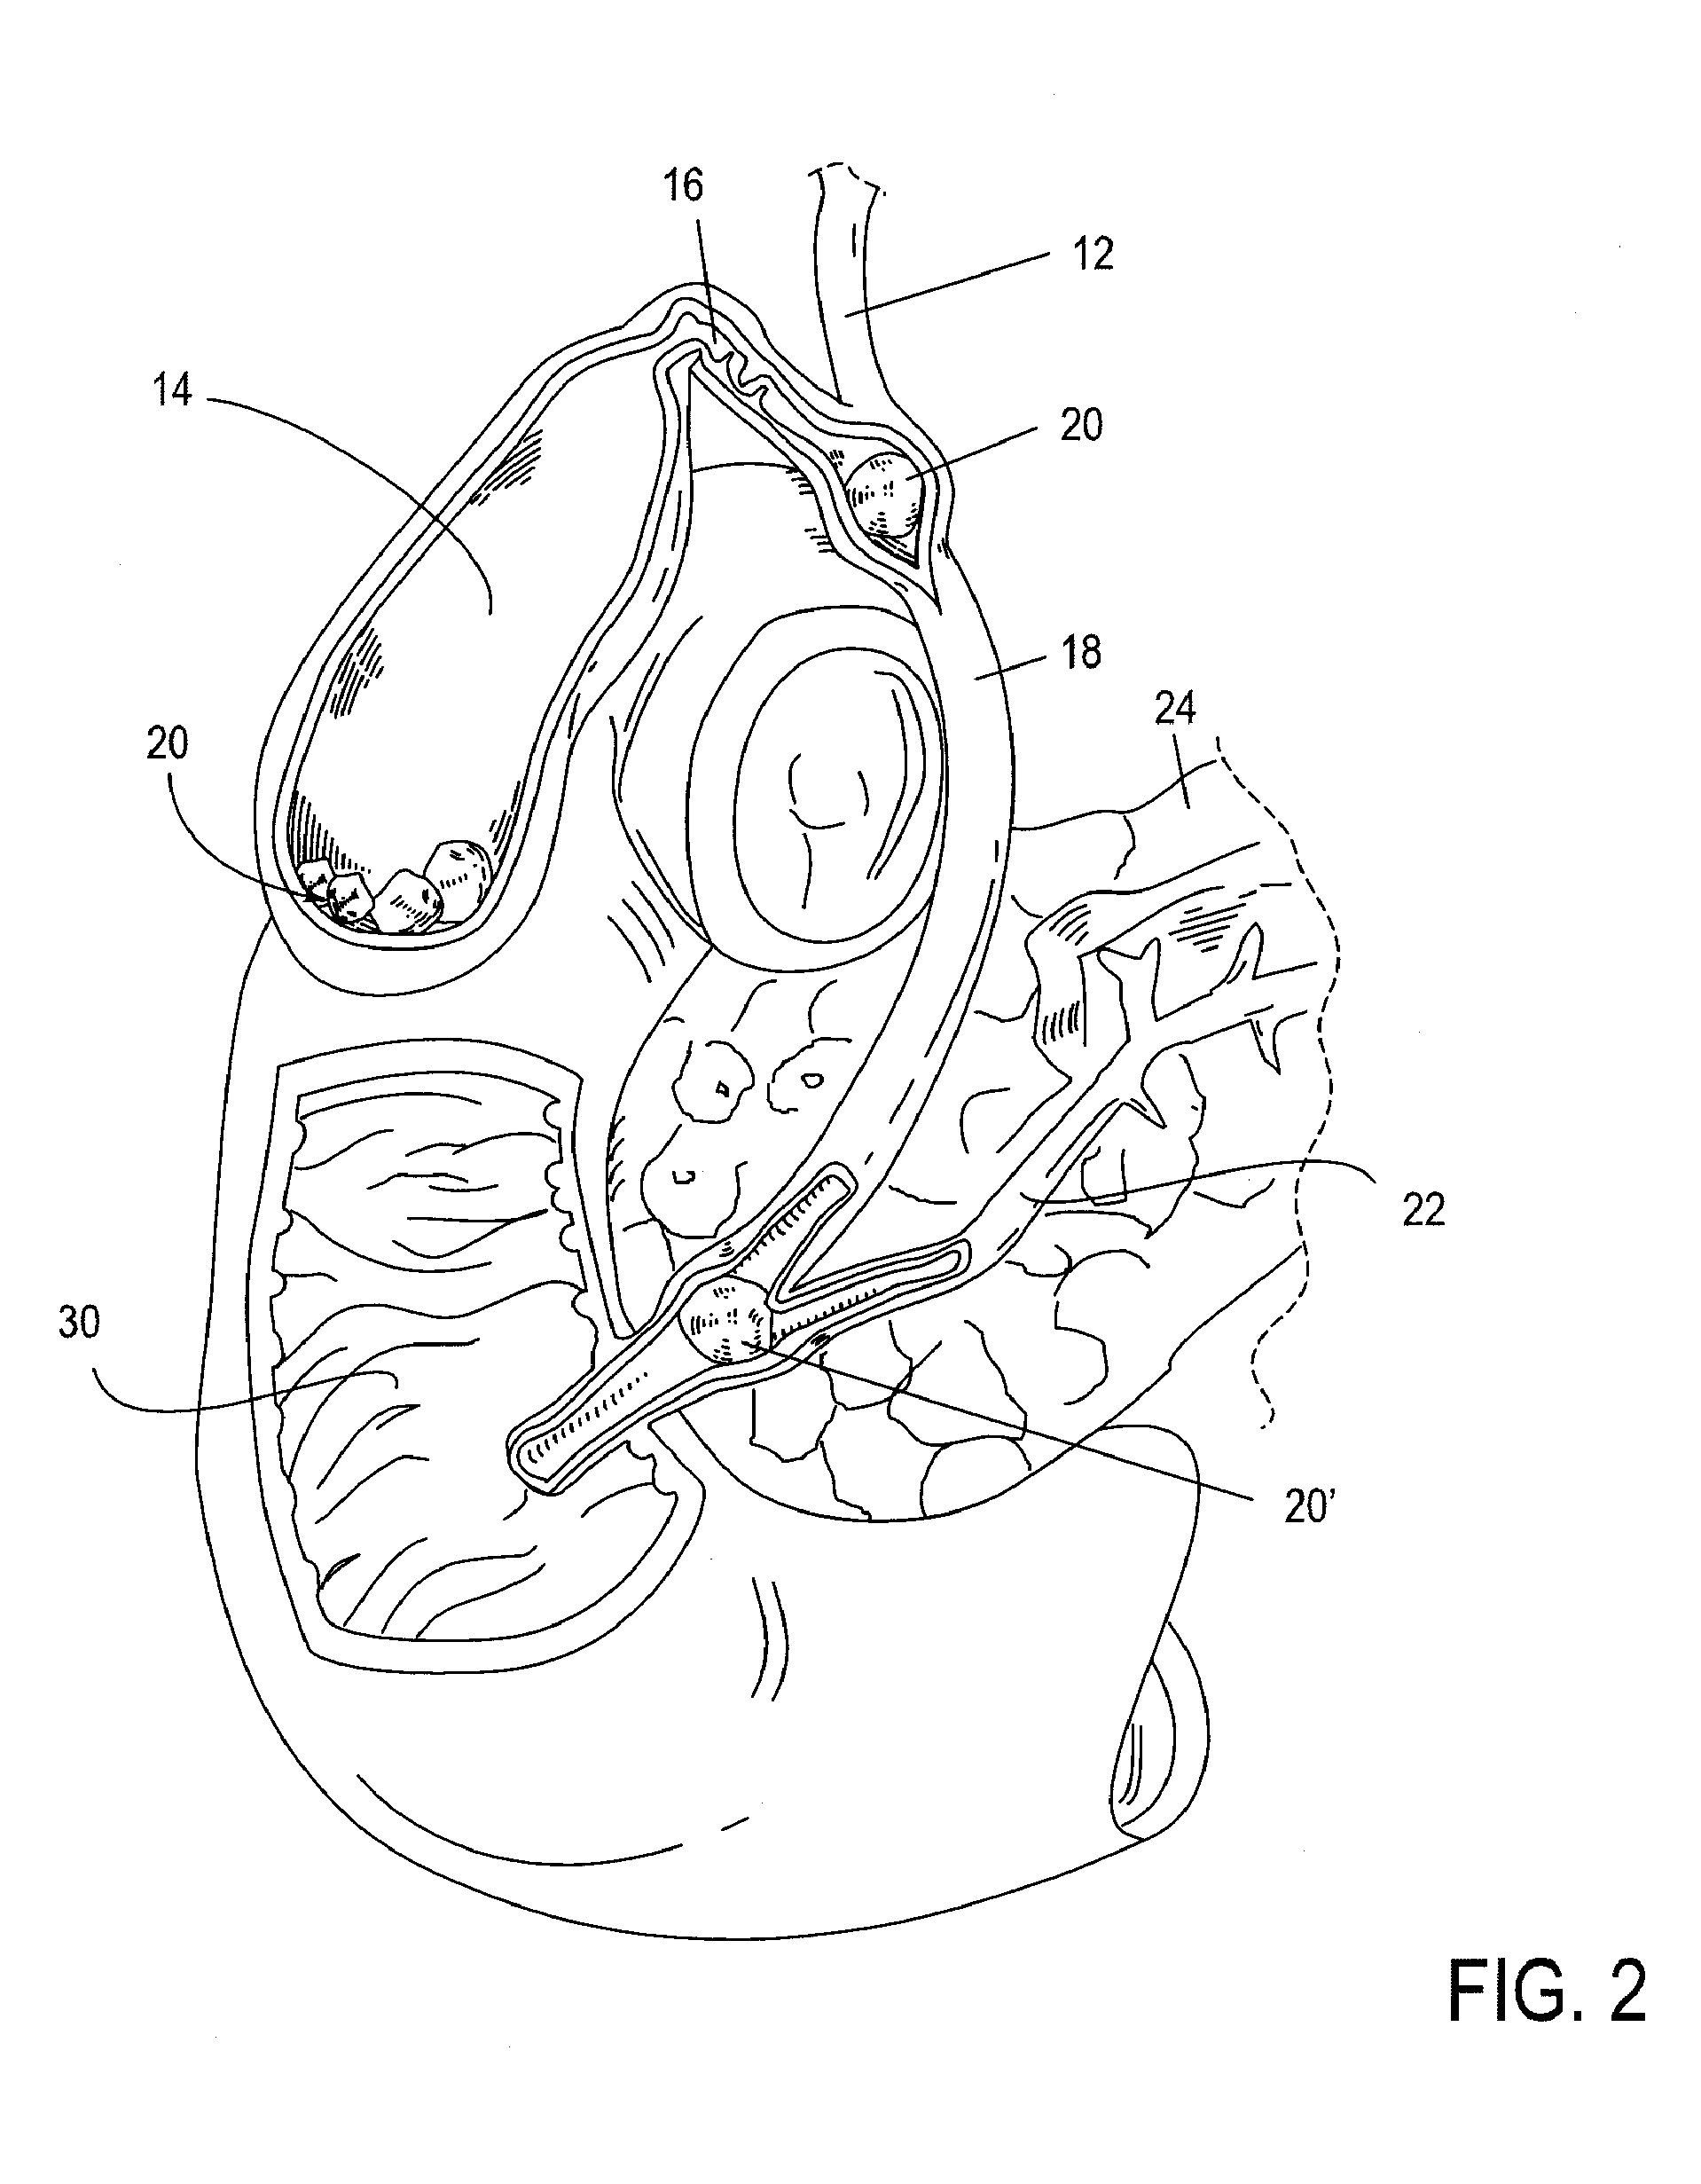 Methods, Devices, Kits and Systems for Defunctionalizing the Gallbladder